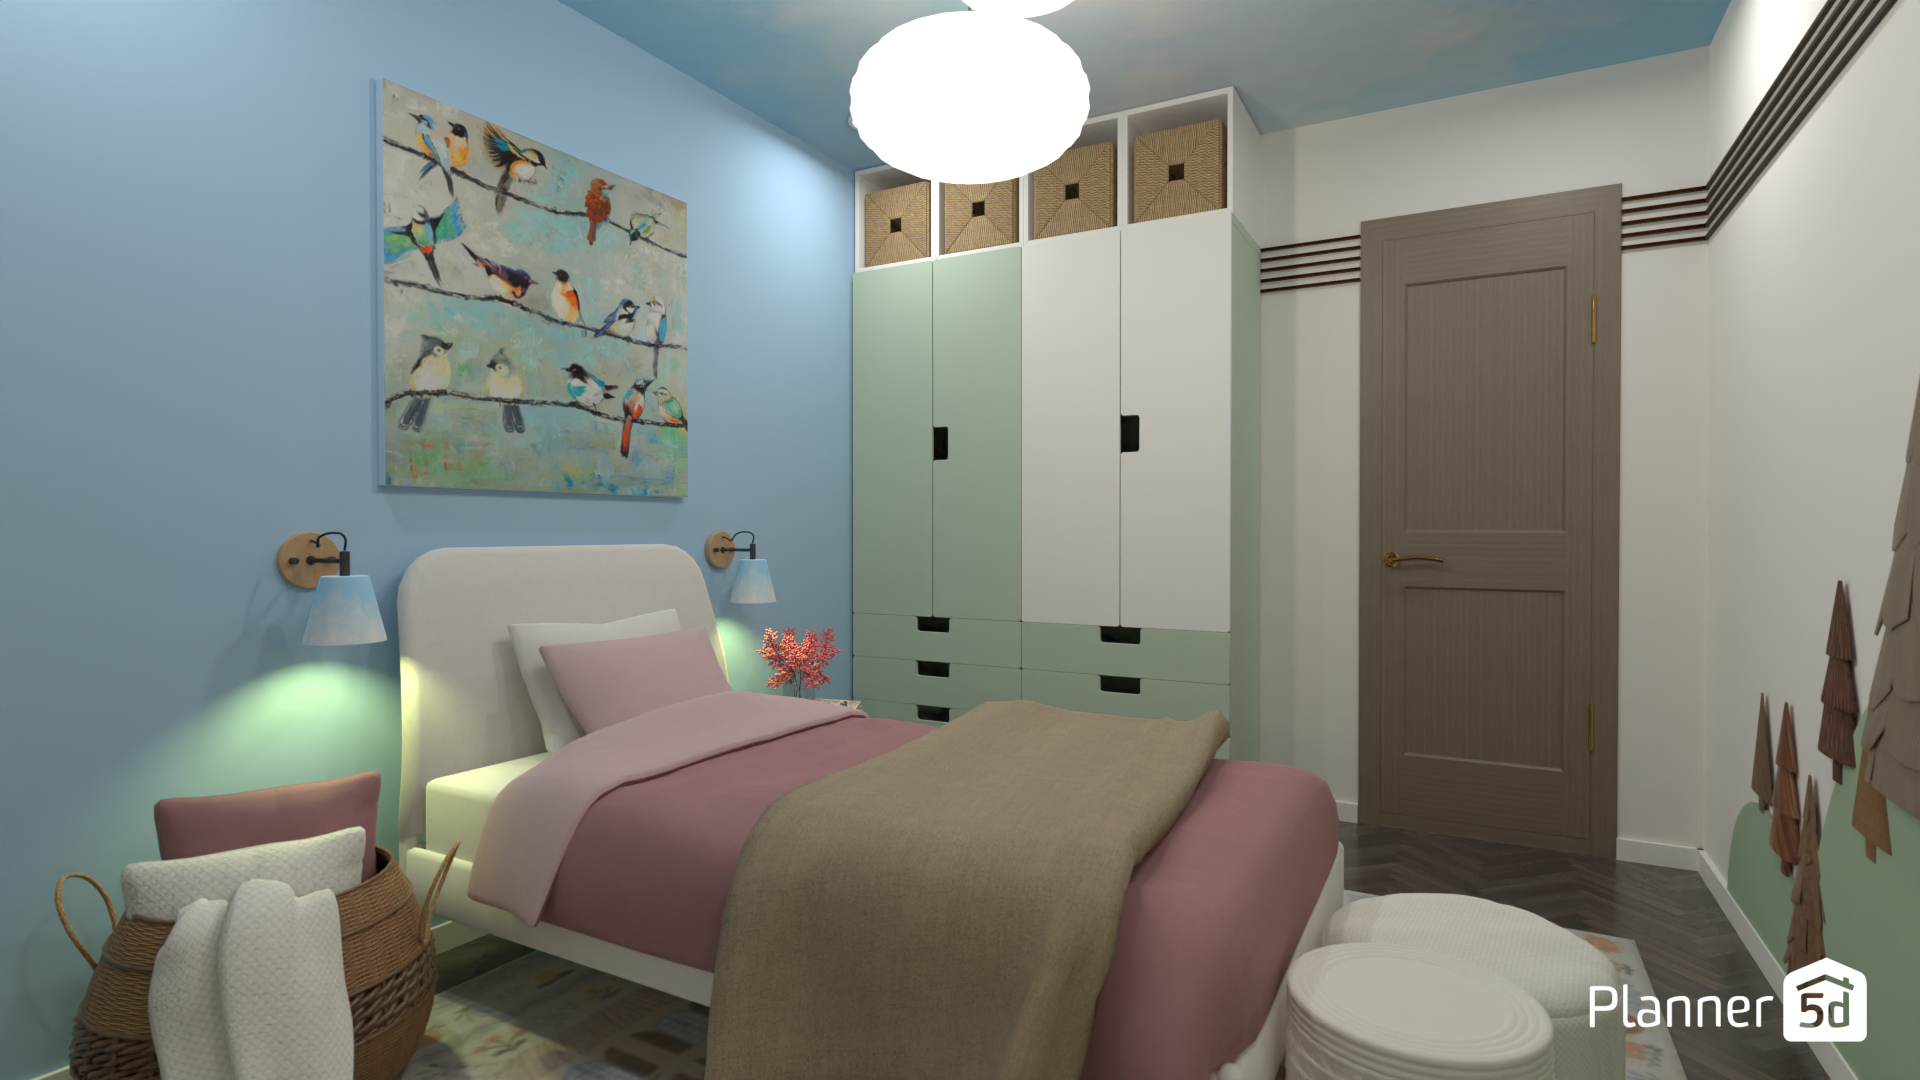 Kid's room in BM paint colors 16595559 by Darina Doncheva image